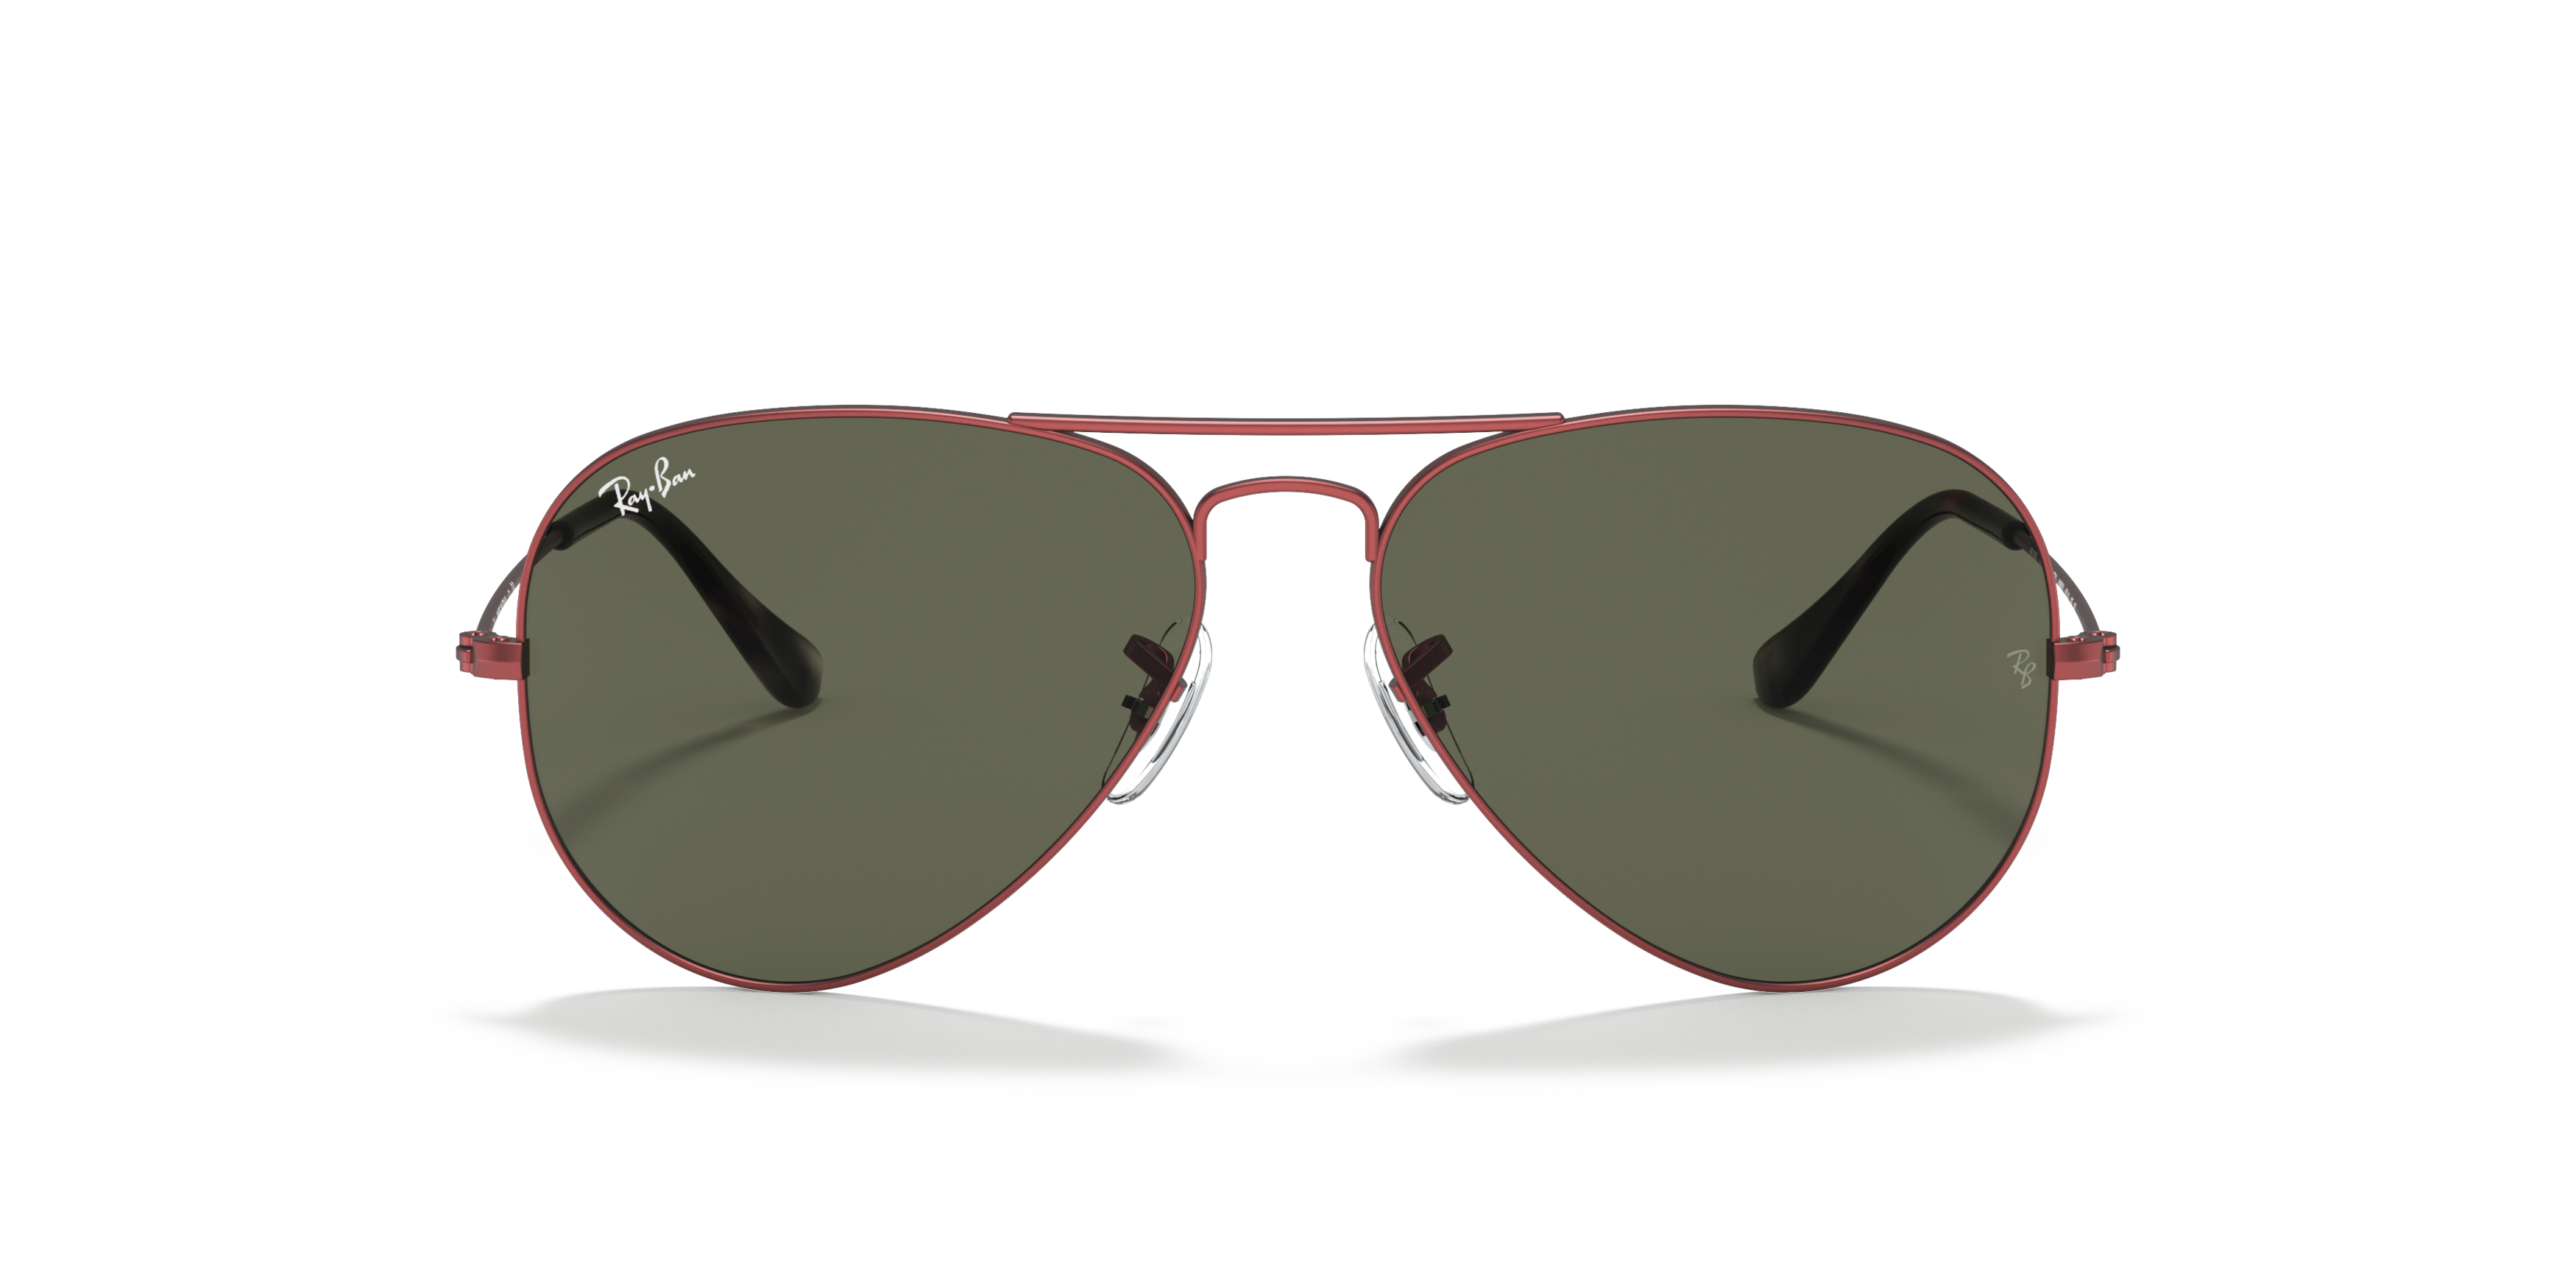 [products.image.front] Ray-Ban Aviator Classic RB3025 918831